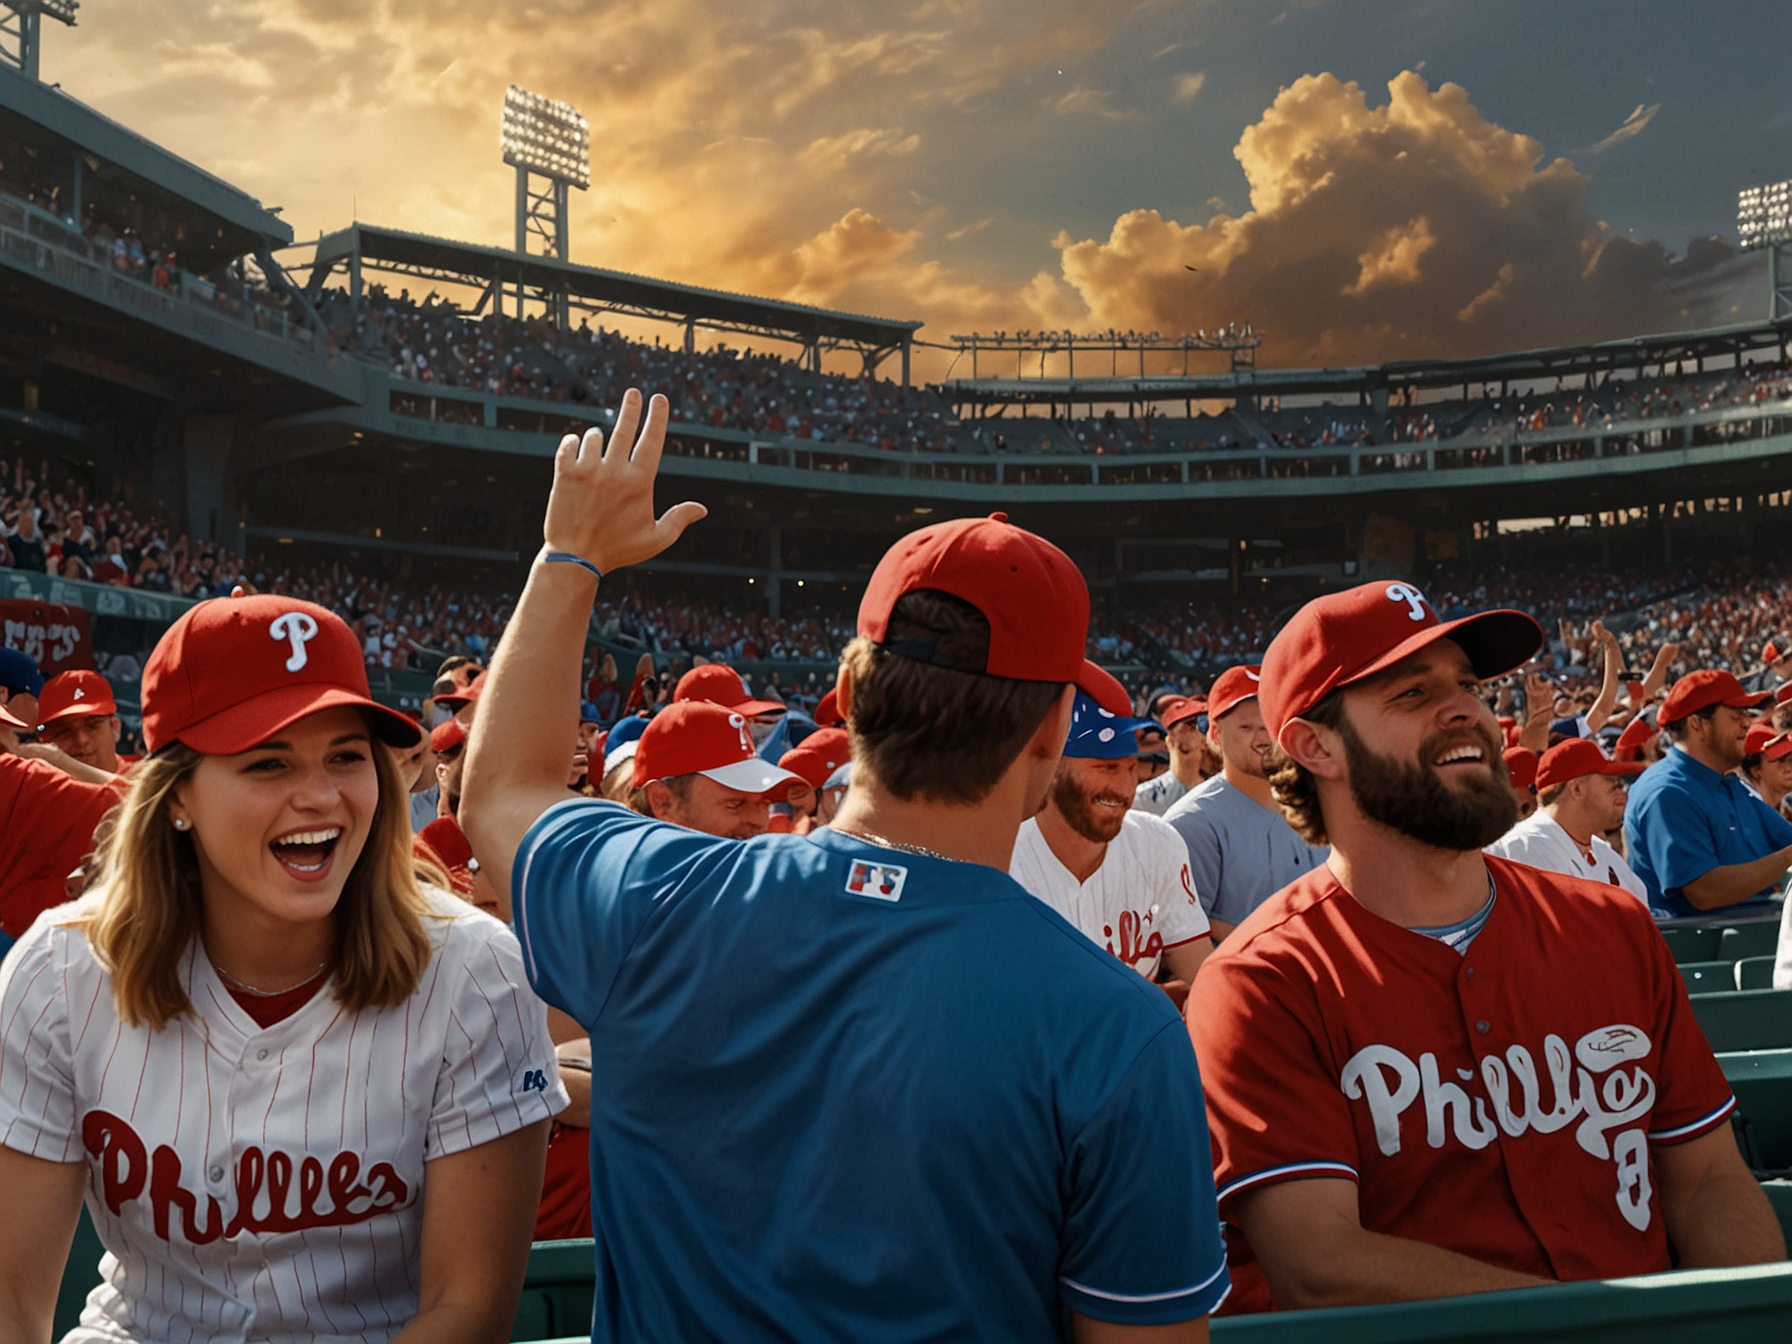 Phillies fans cheer energetically at Citizens Bank Park, creating a lively atmosphere. The players, including stars like Bryce Harper, prepare with intense focus, symbolizing their quest for redemption.